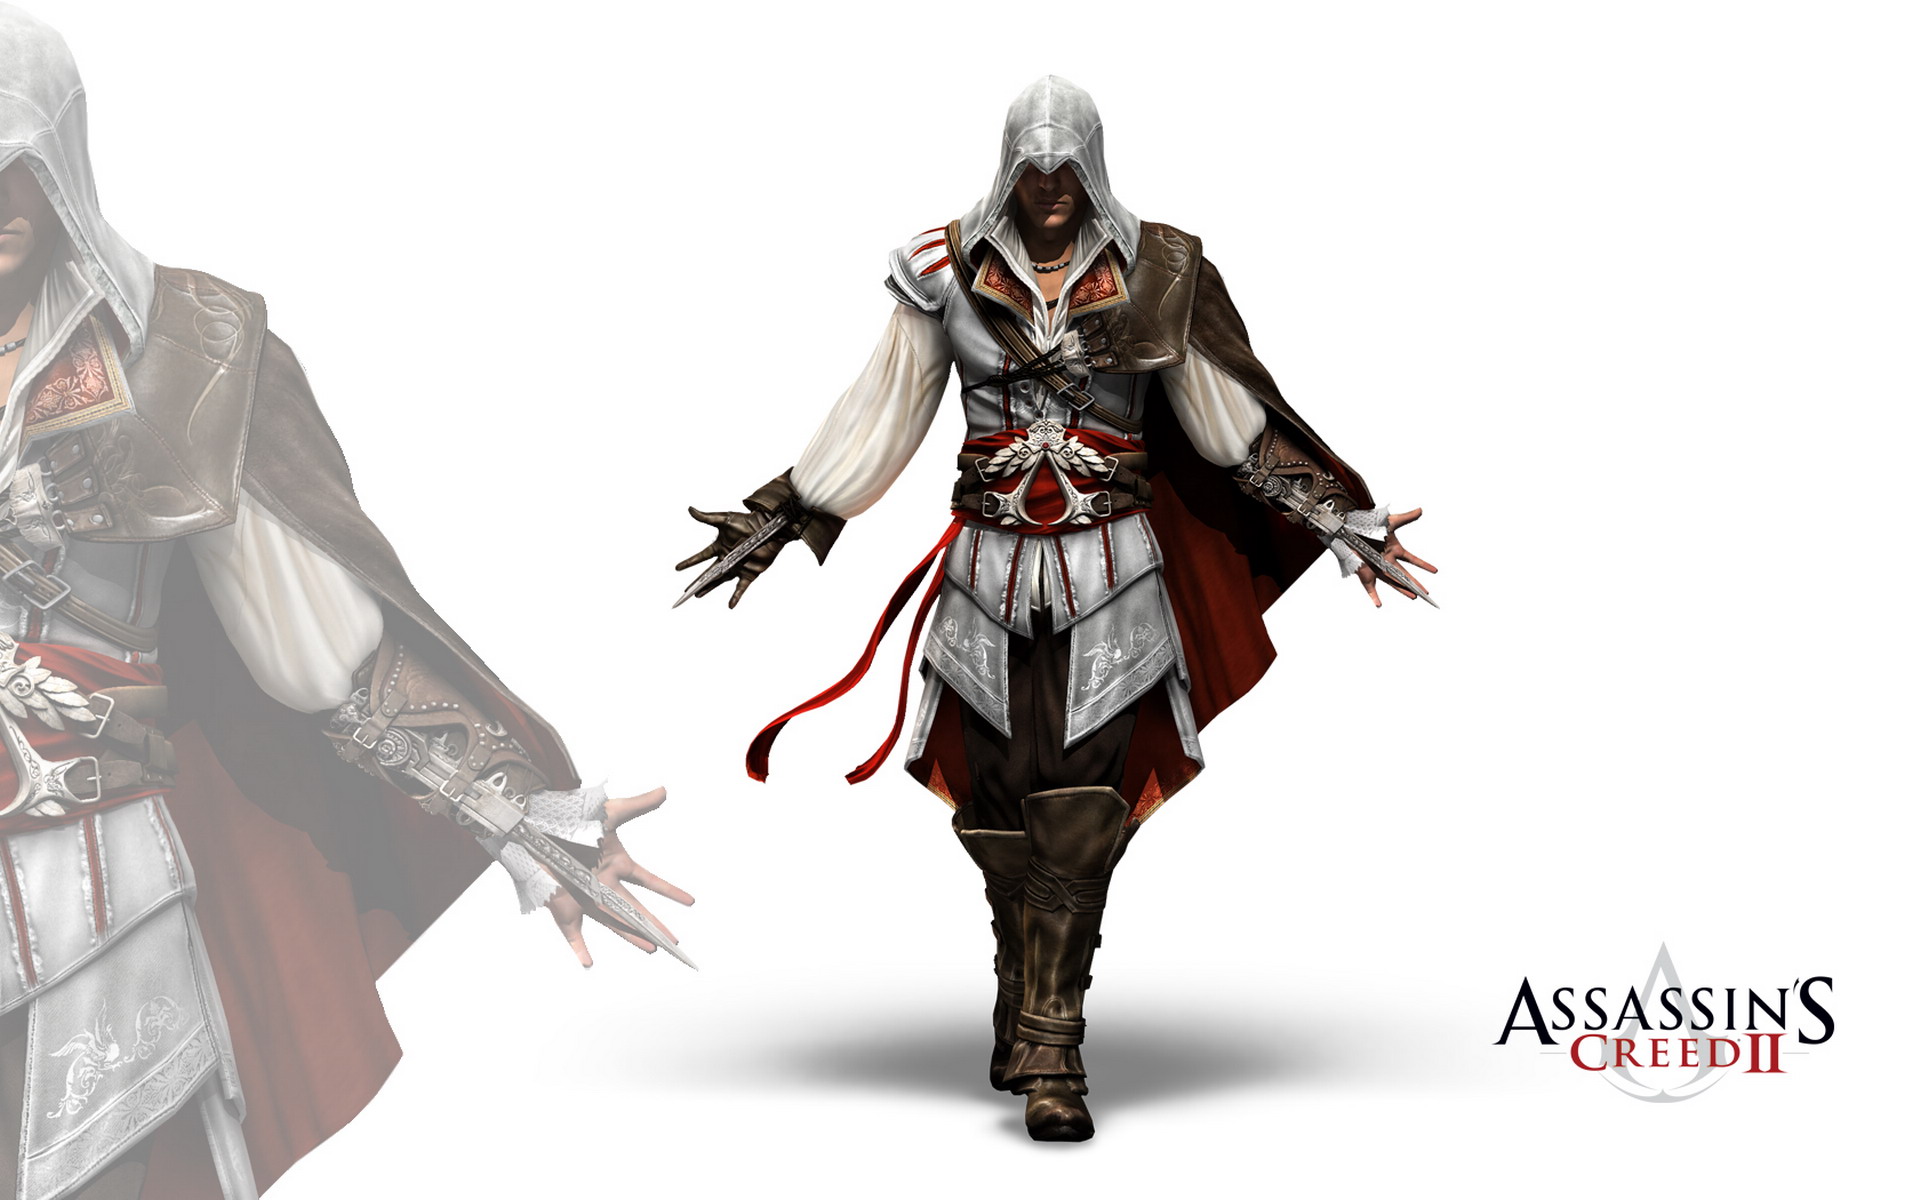 Assassin's Creed II Pics, Video Game Collection